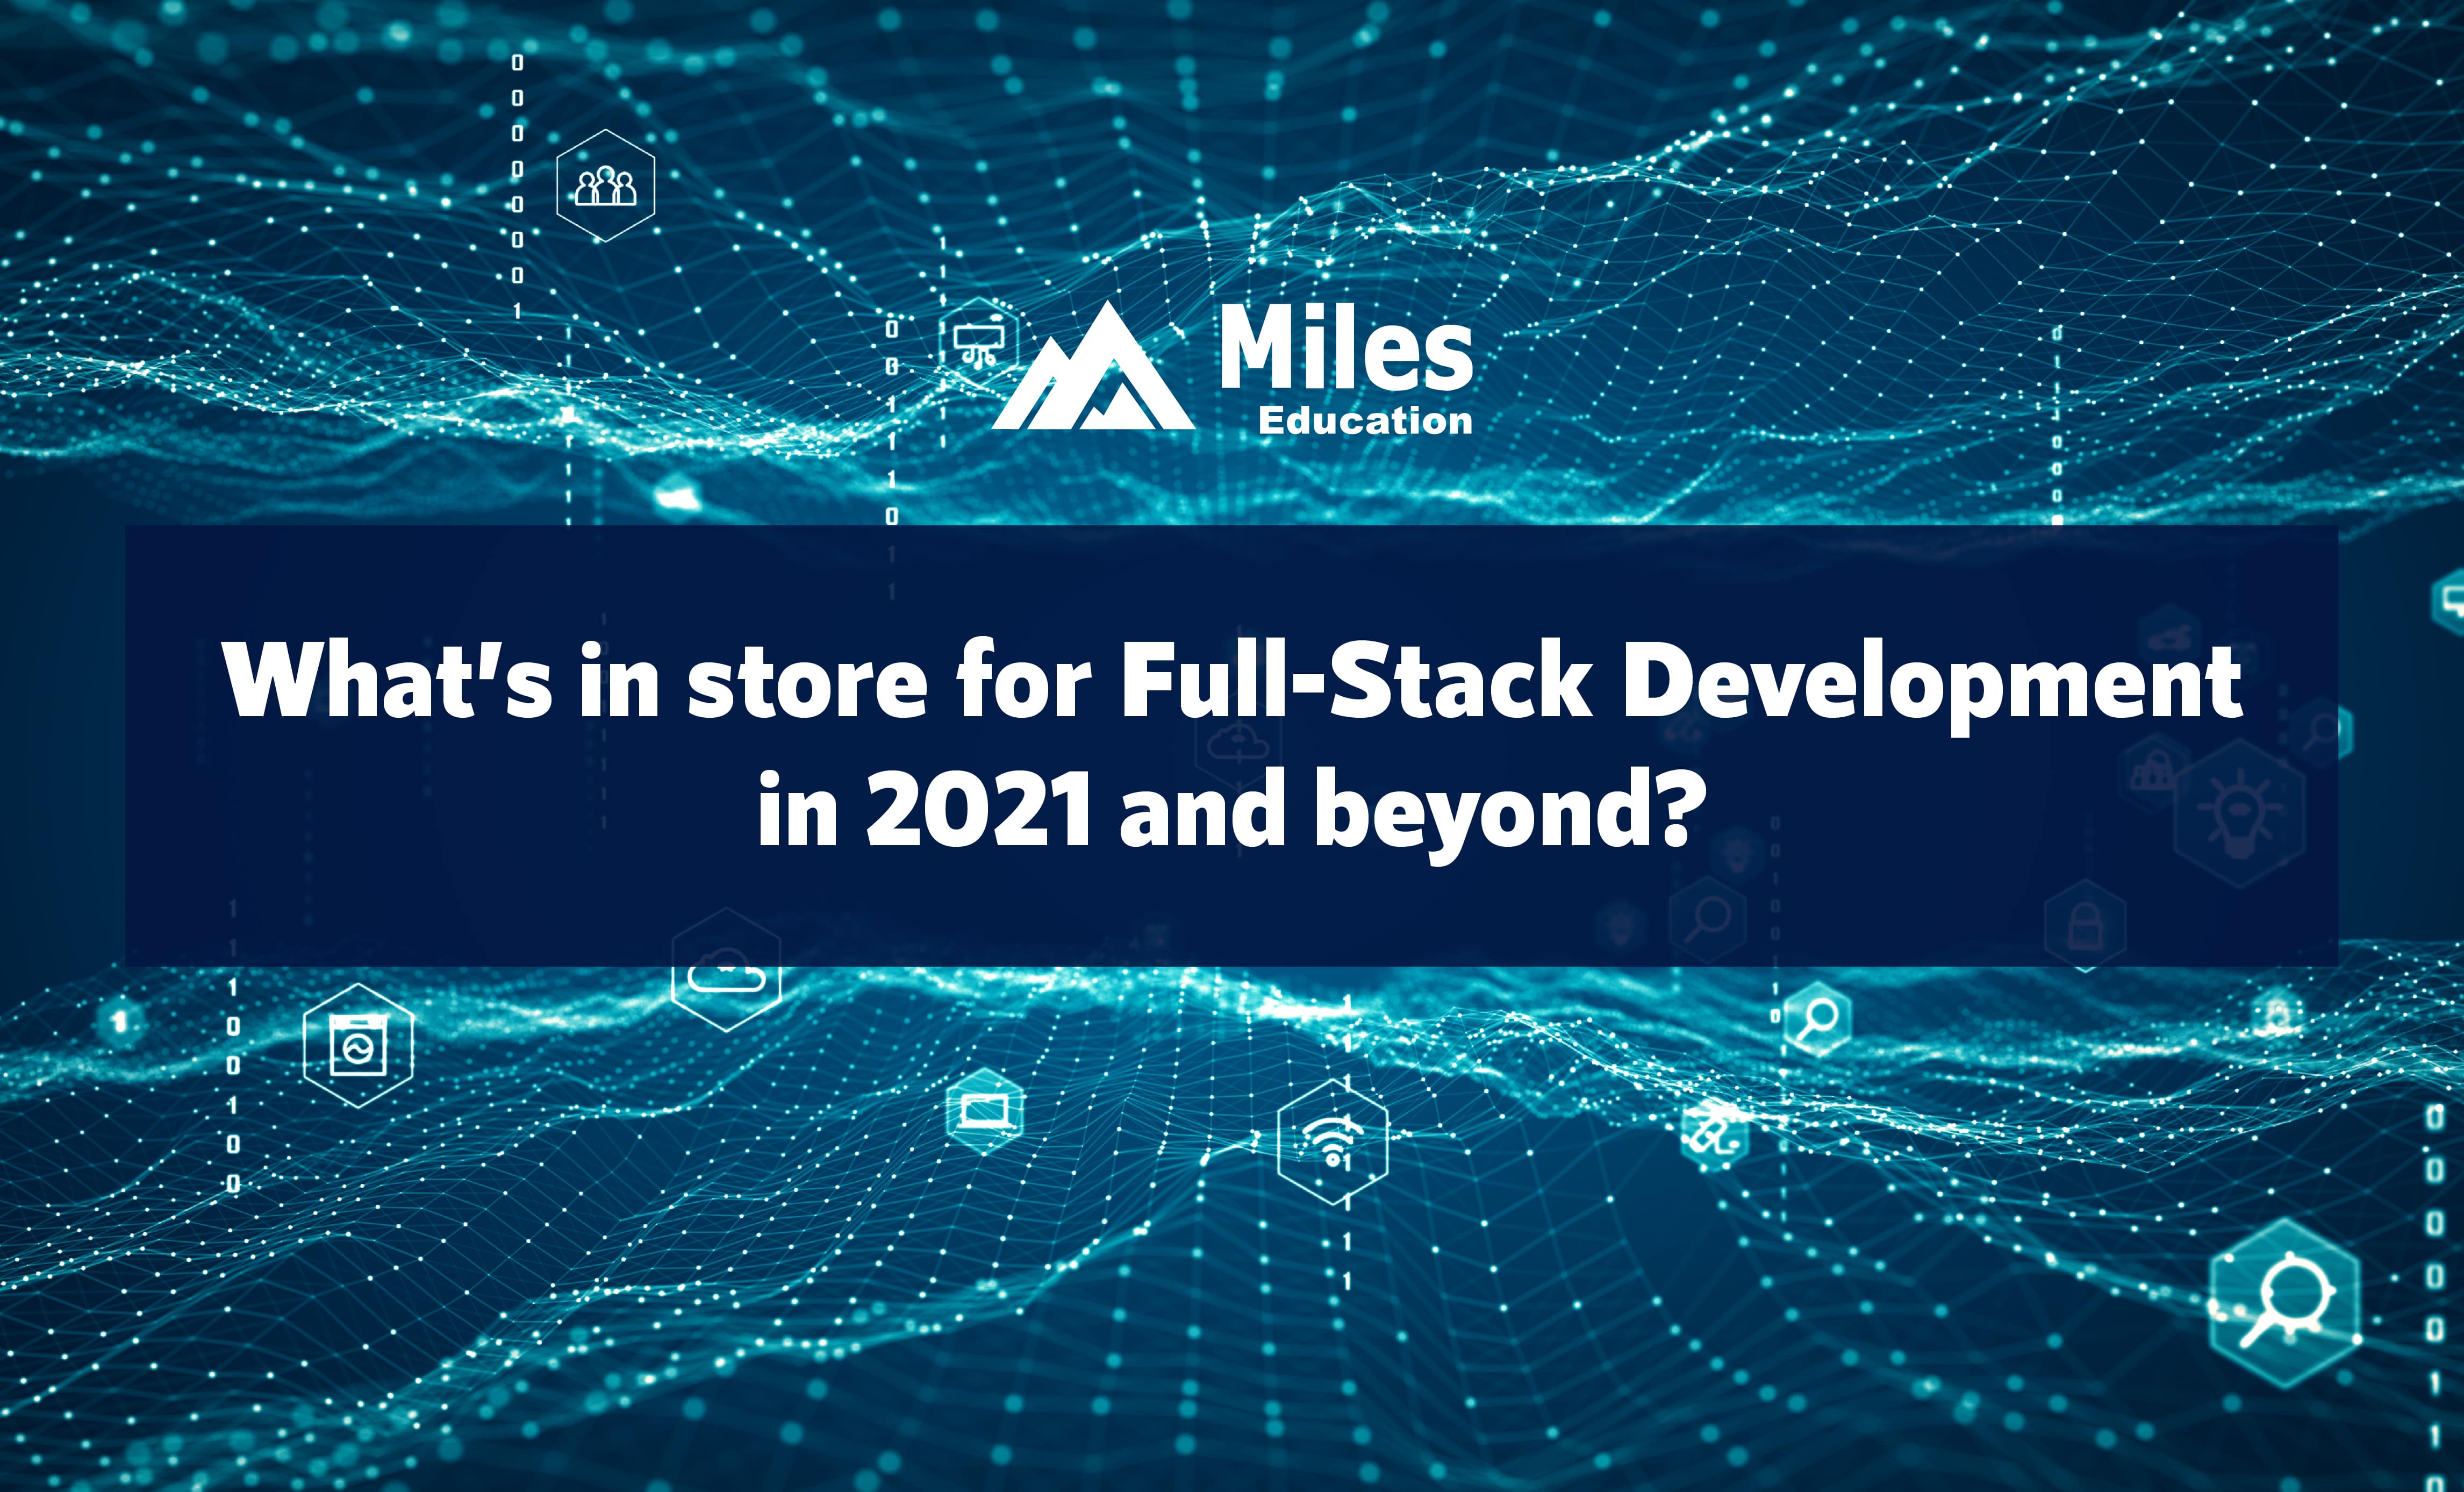 What’s in Store for Full-Stack Development in 2021 and Beyond